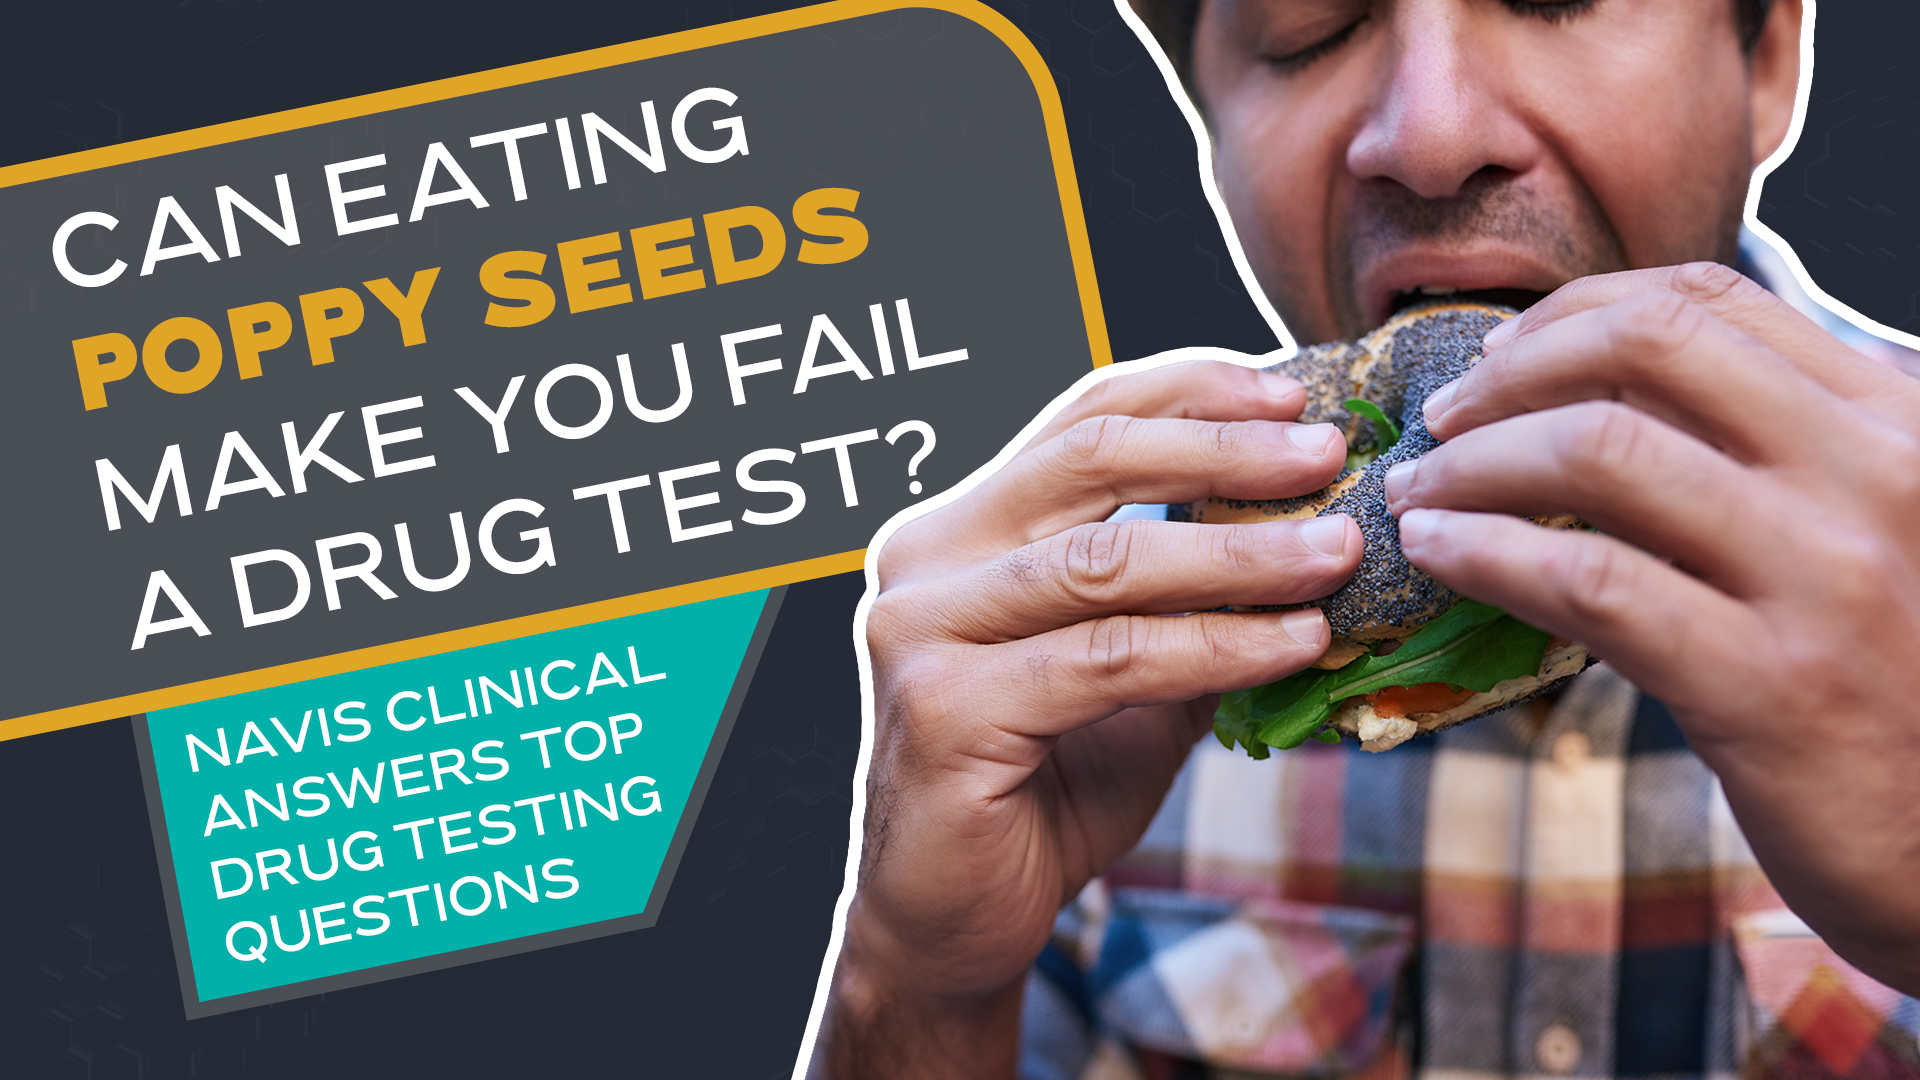 Can Eating Poppy Seeds Make You Fail a Drug Test?